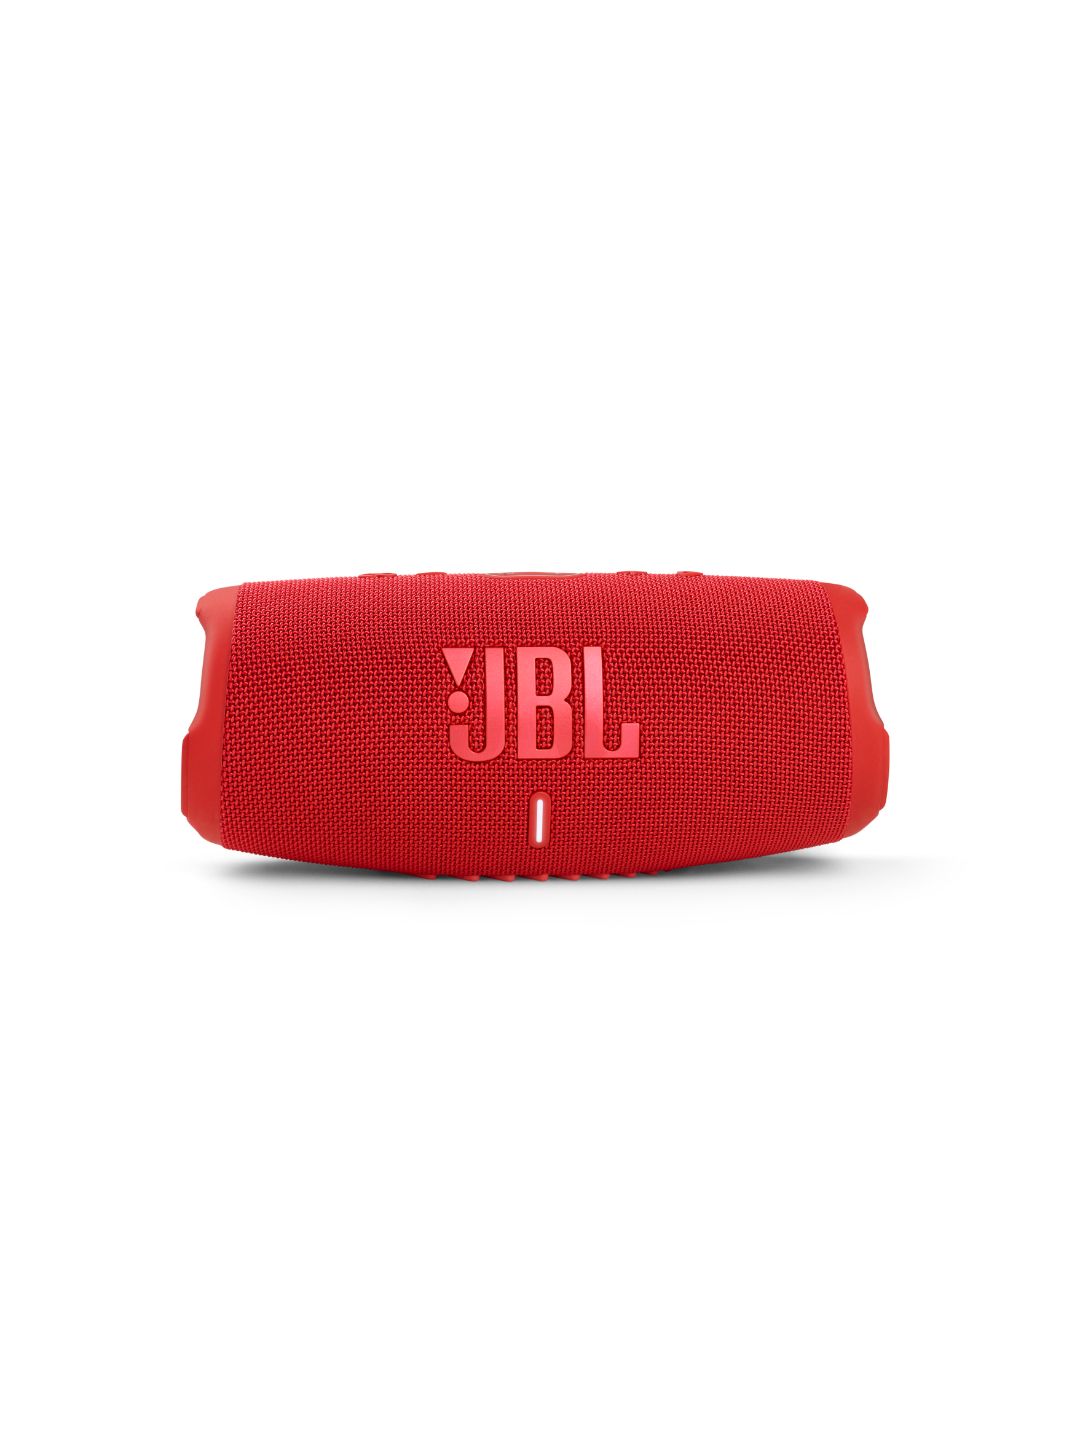 JBL Red Charge 5 Wireless Portable Bluetooth Speaker Price in India